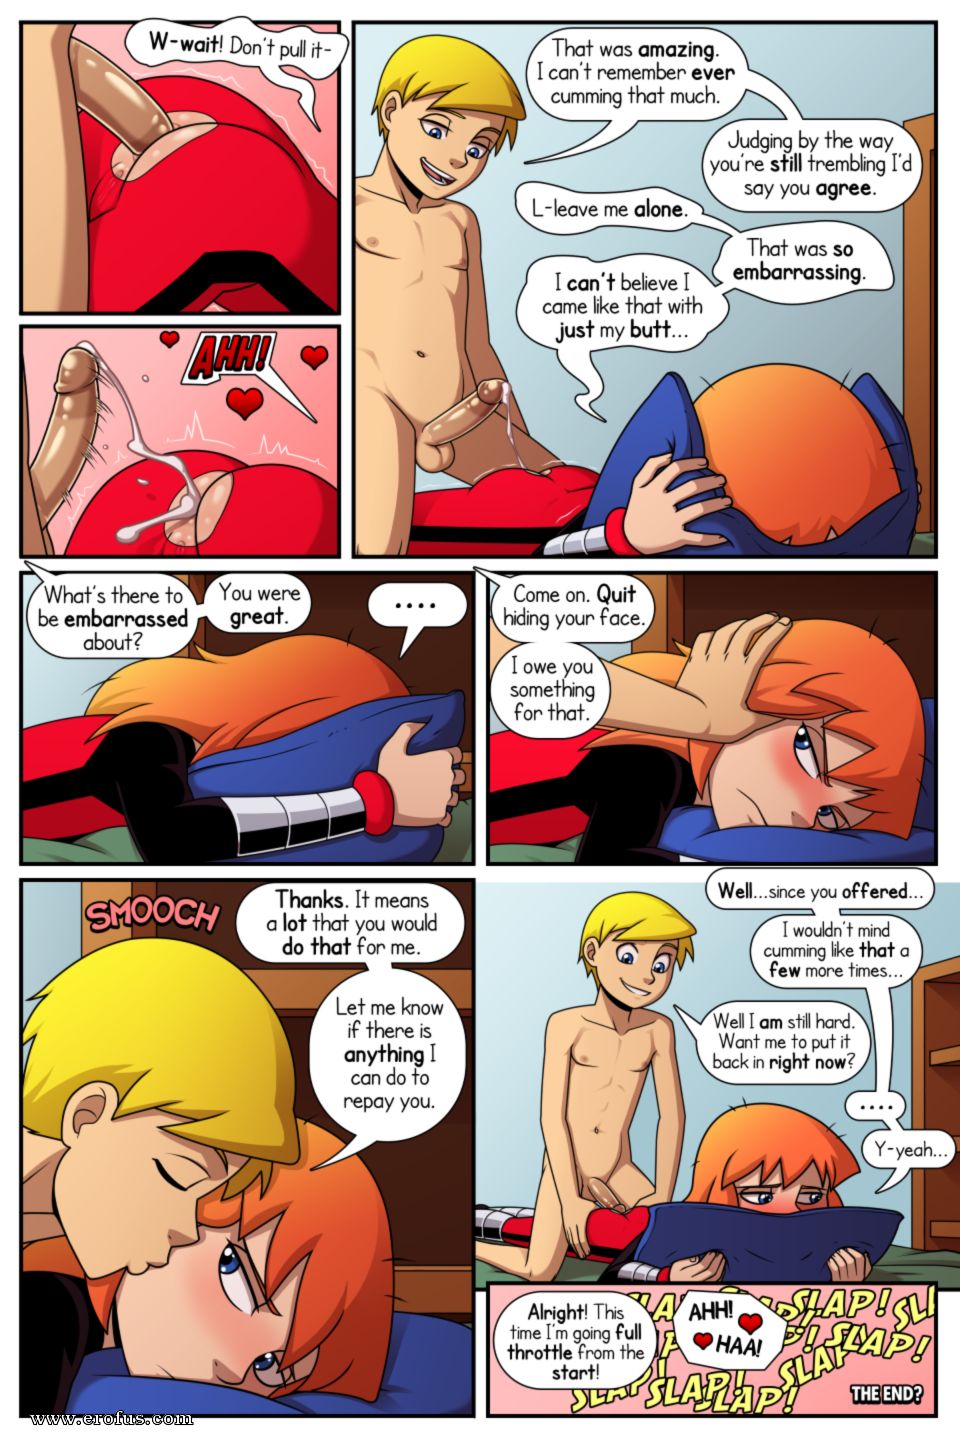 Rough Riding - Page 7 | incognitymous-comics/power-pack-rough-riding ...